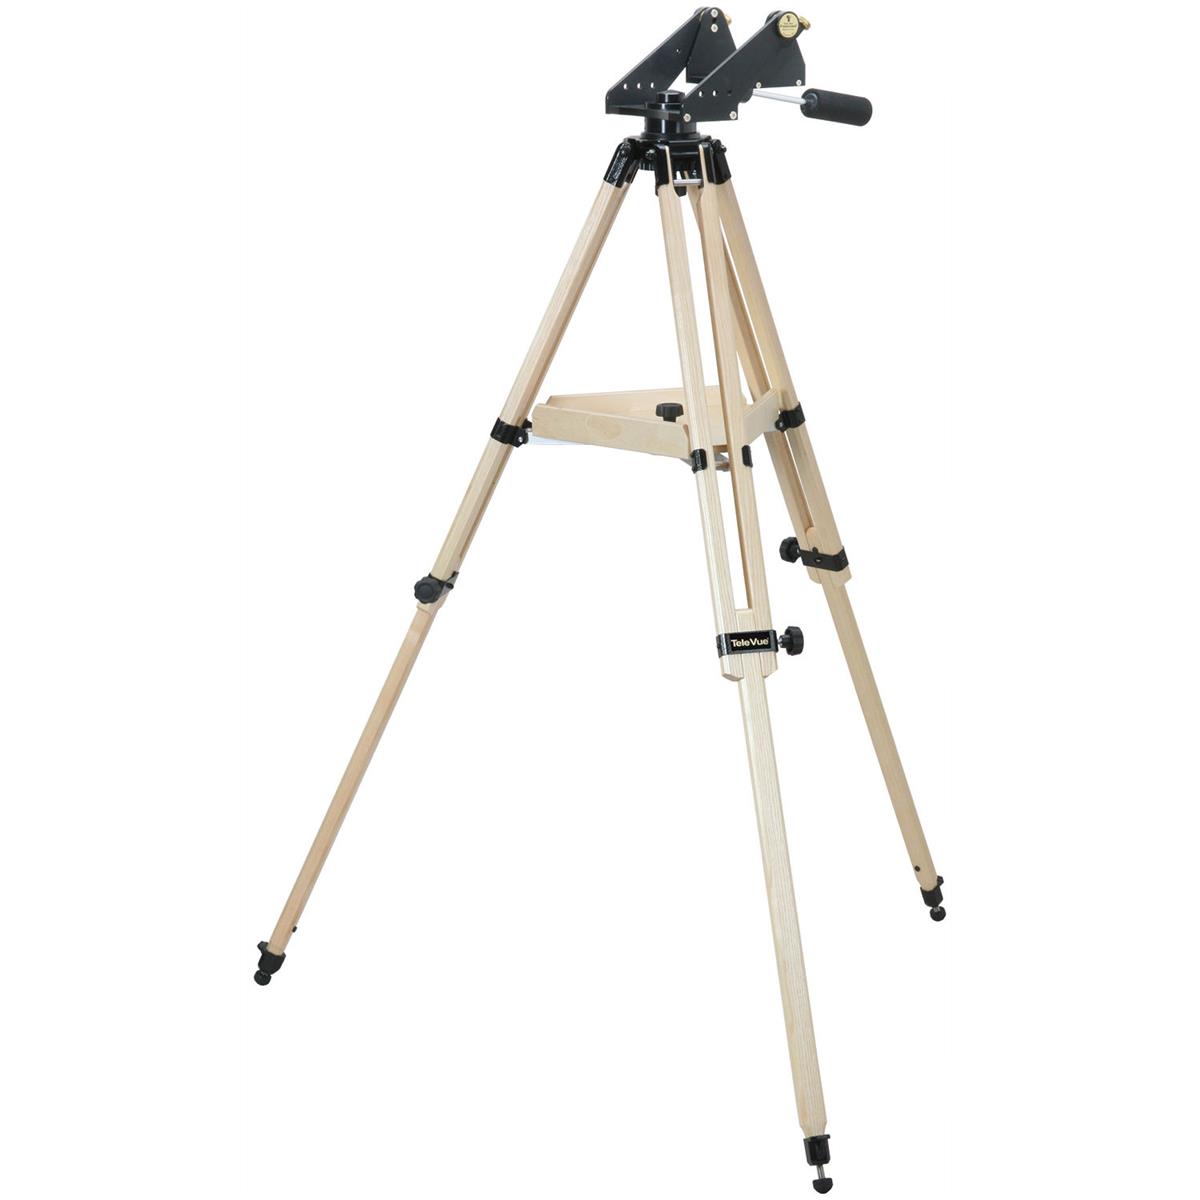 Image of Tele Vue Panoramic Mount with Ash Wood Tripod - Upgraded Version